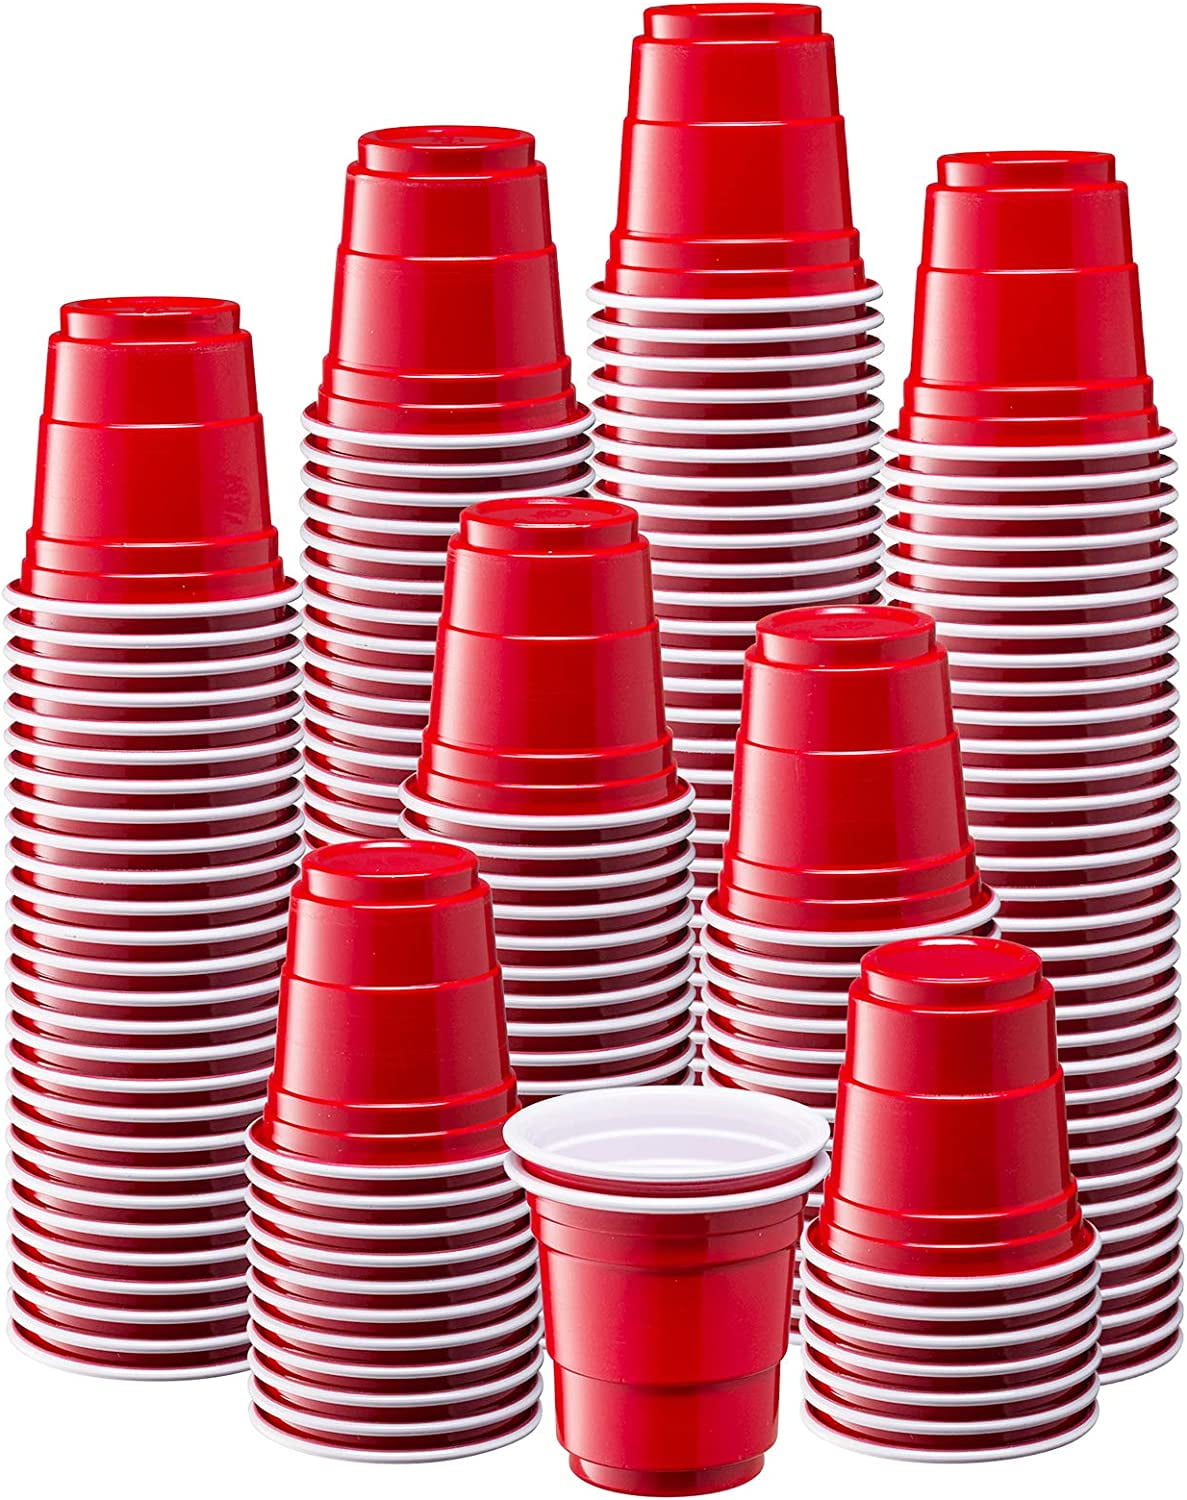 Choice 2 oz. Red Plastic Shot Cup - 50/Pack